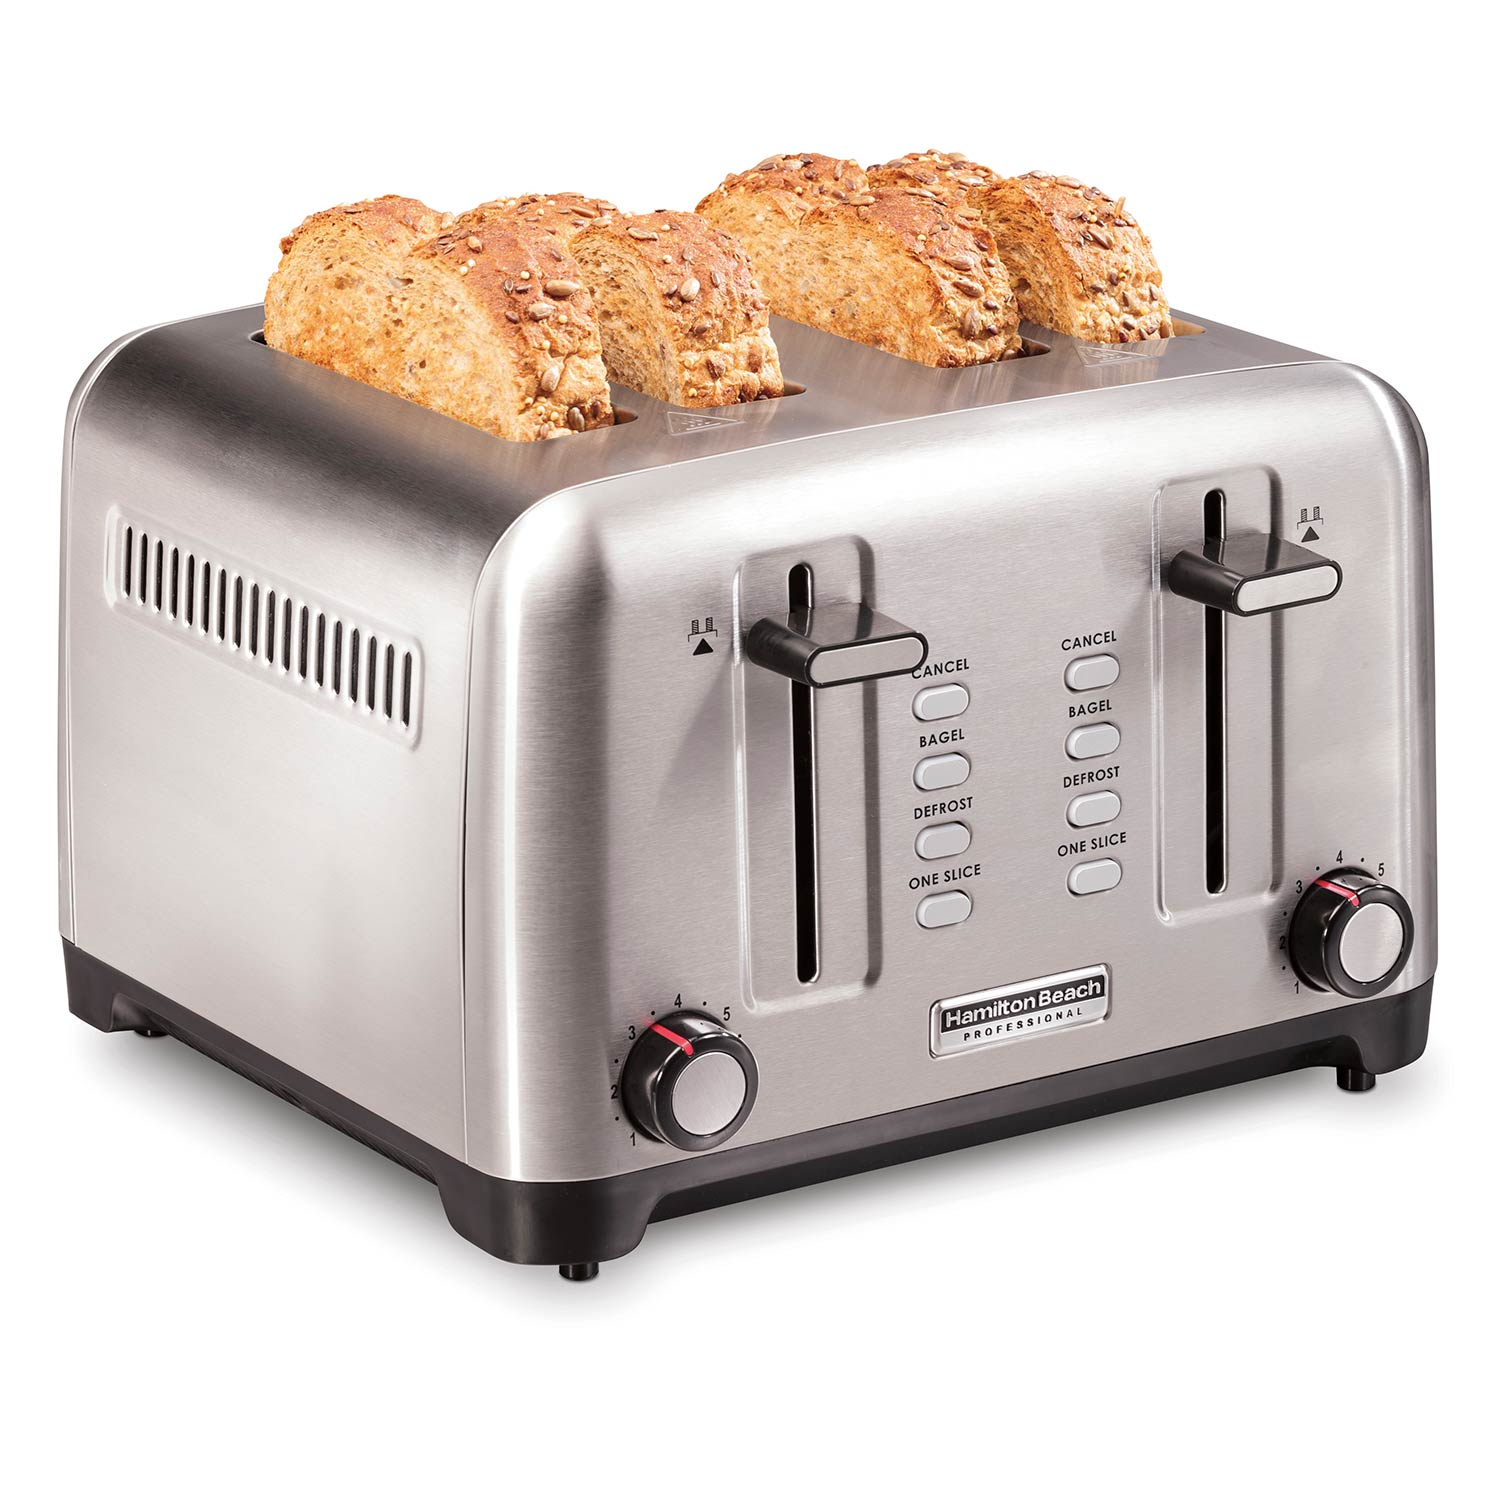 Professional Sure-Toast™ Pro 4 Slice Toaster, Deep & Wide Slots with Sure-Toast Technology (24991)